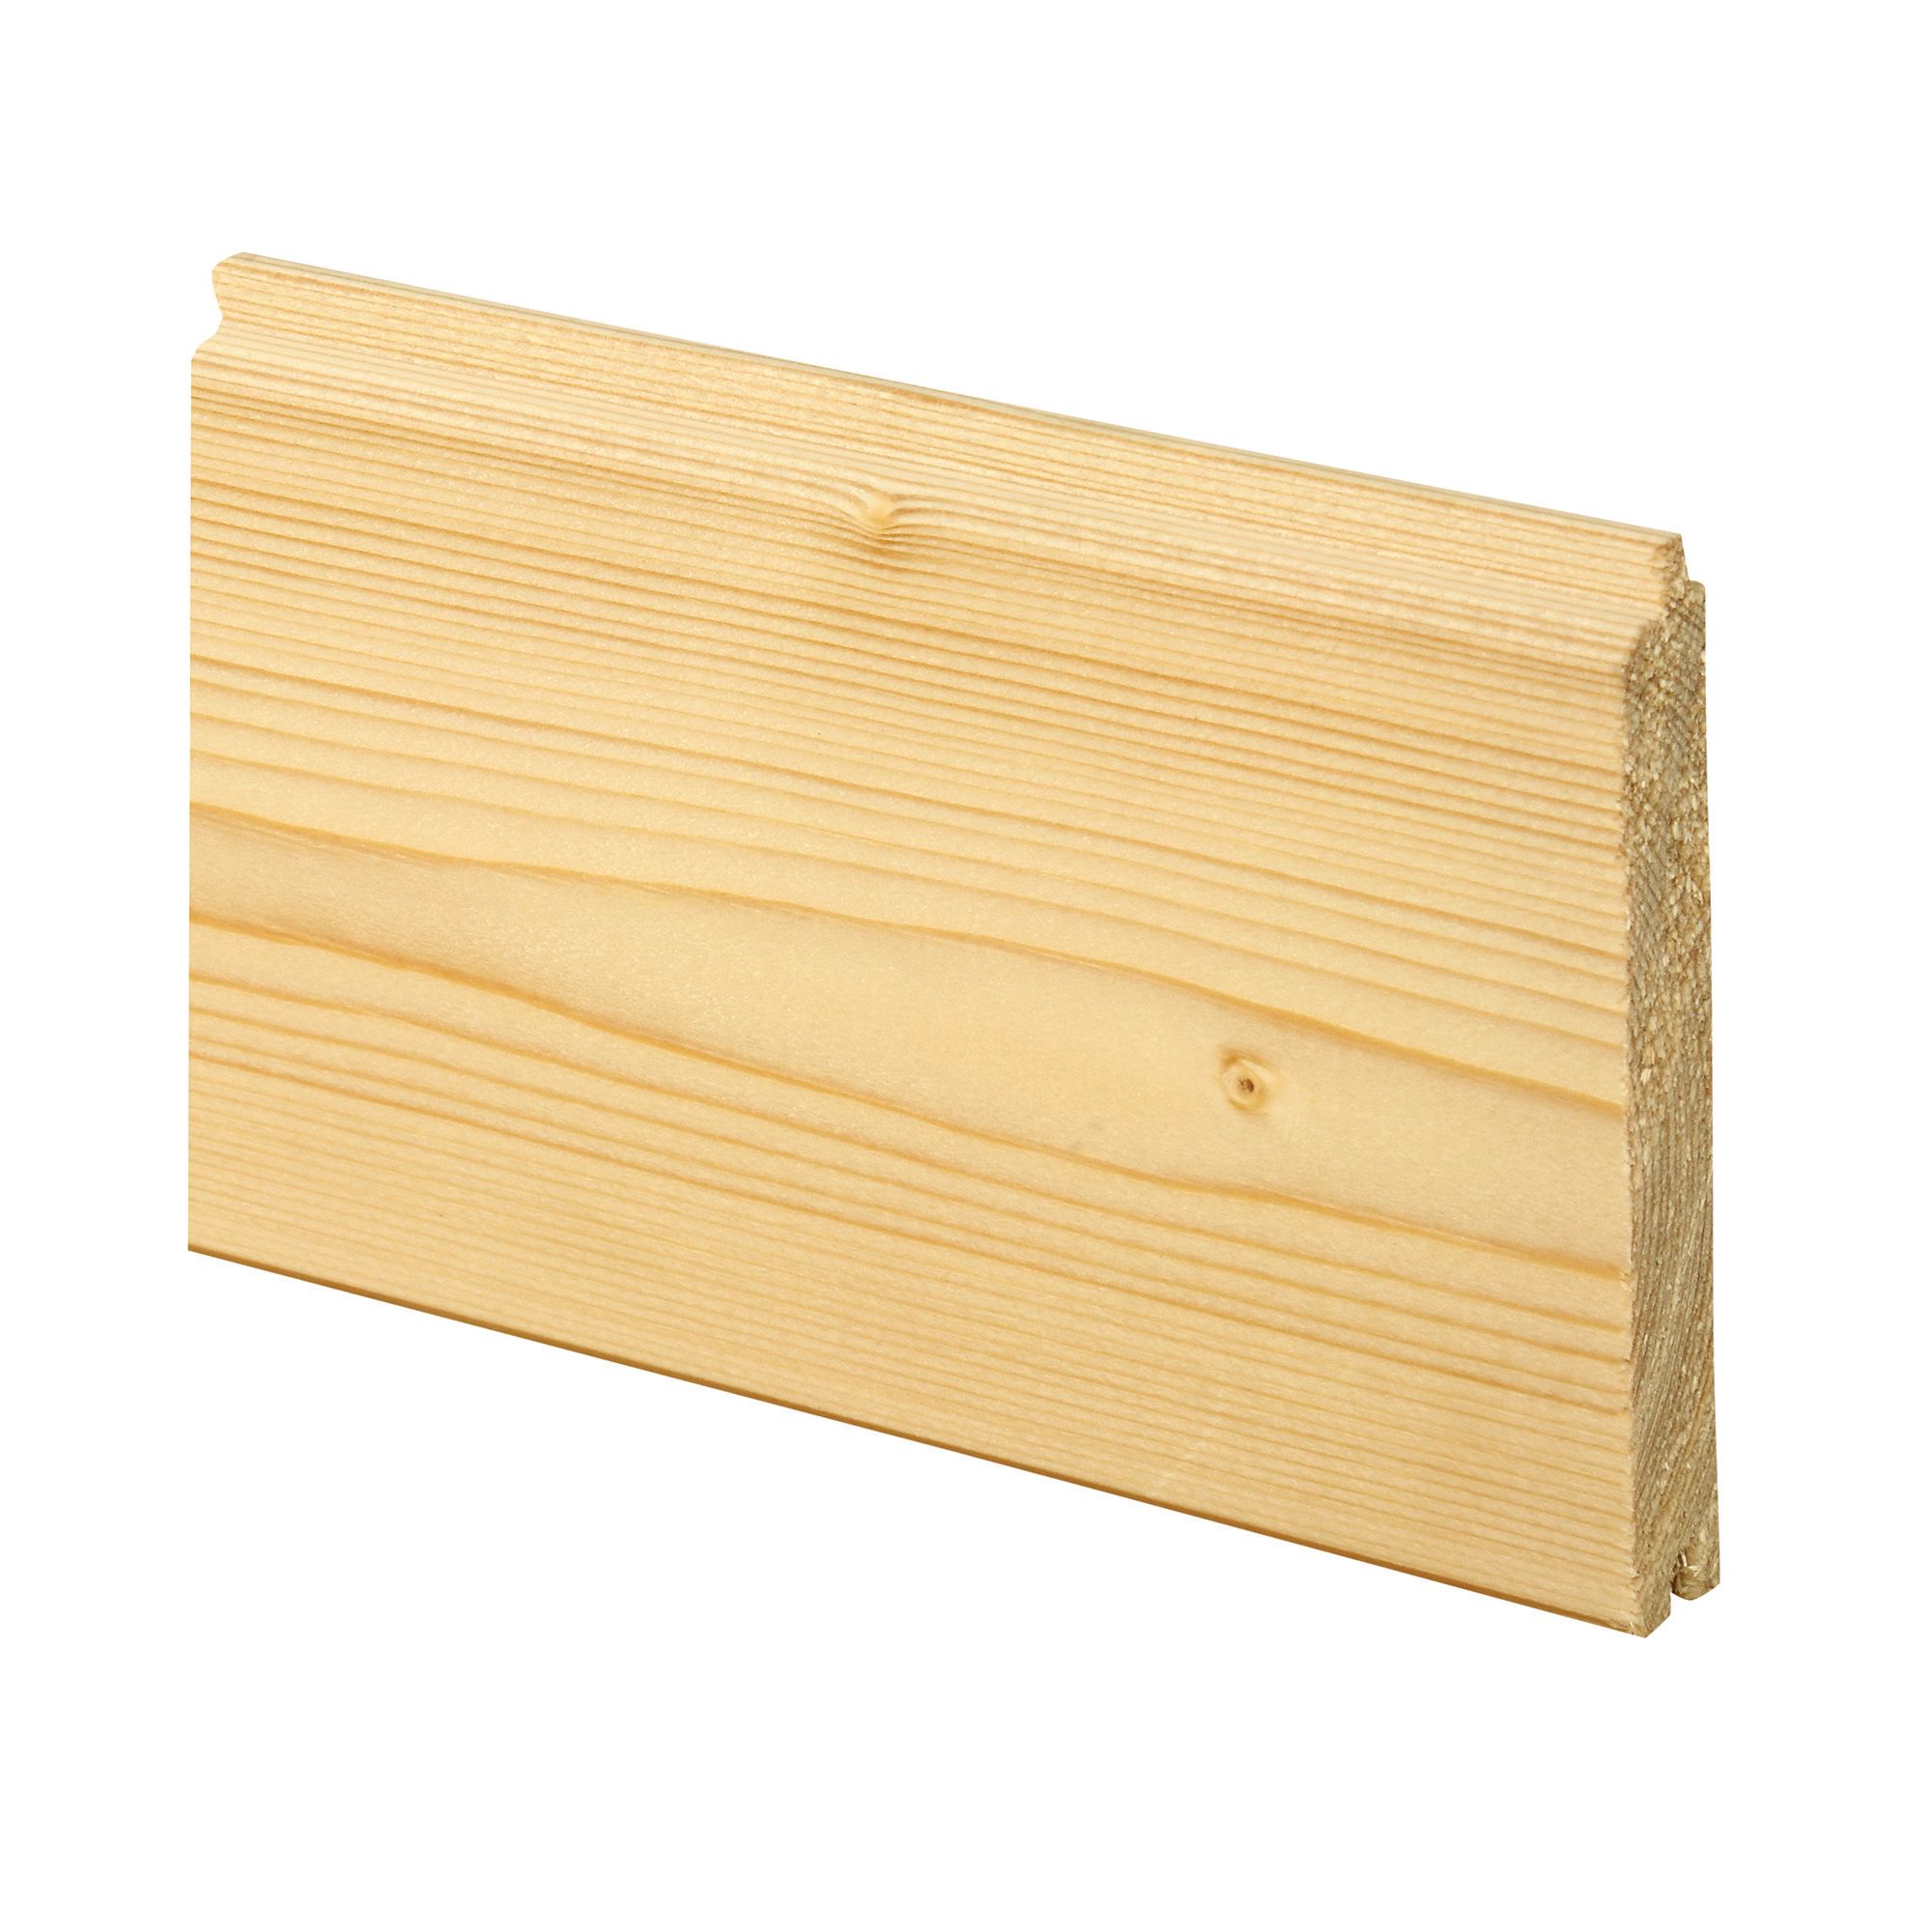 Image of Wickes General Purpose Softwood Cladding - 14mm x 94mm x 1800 mm